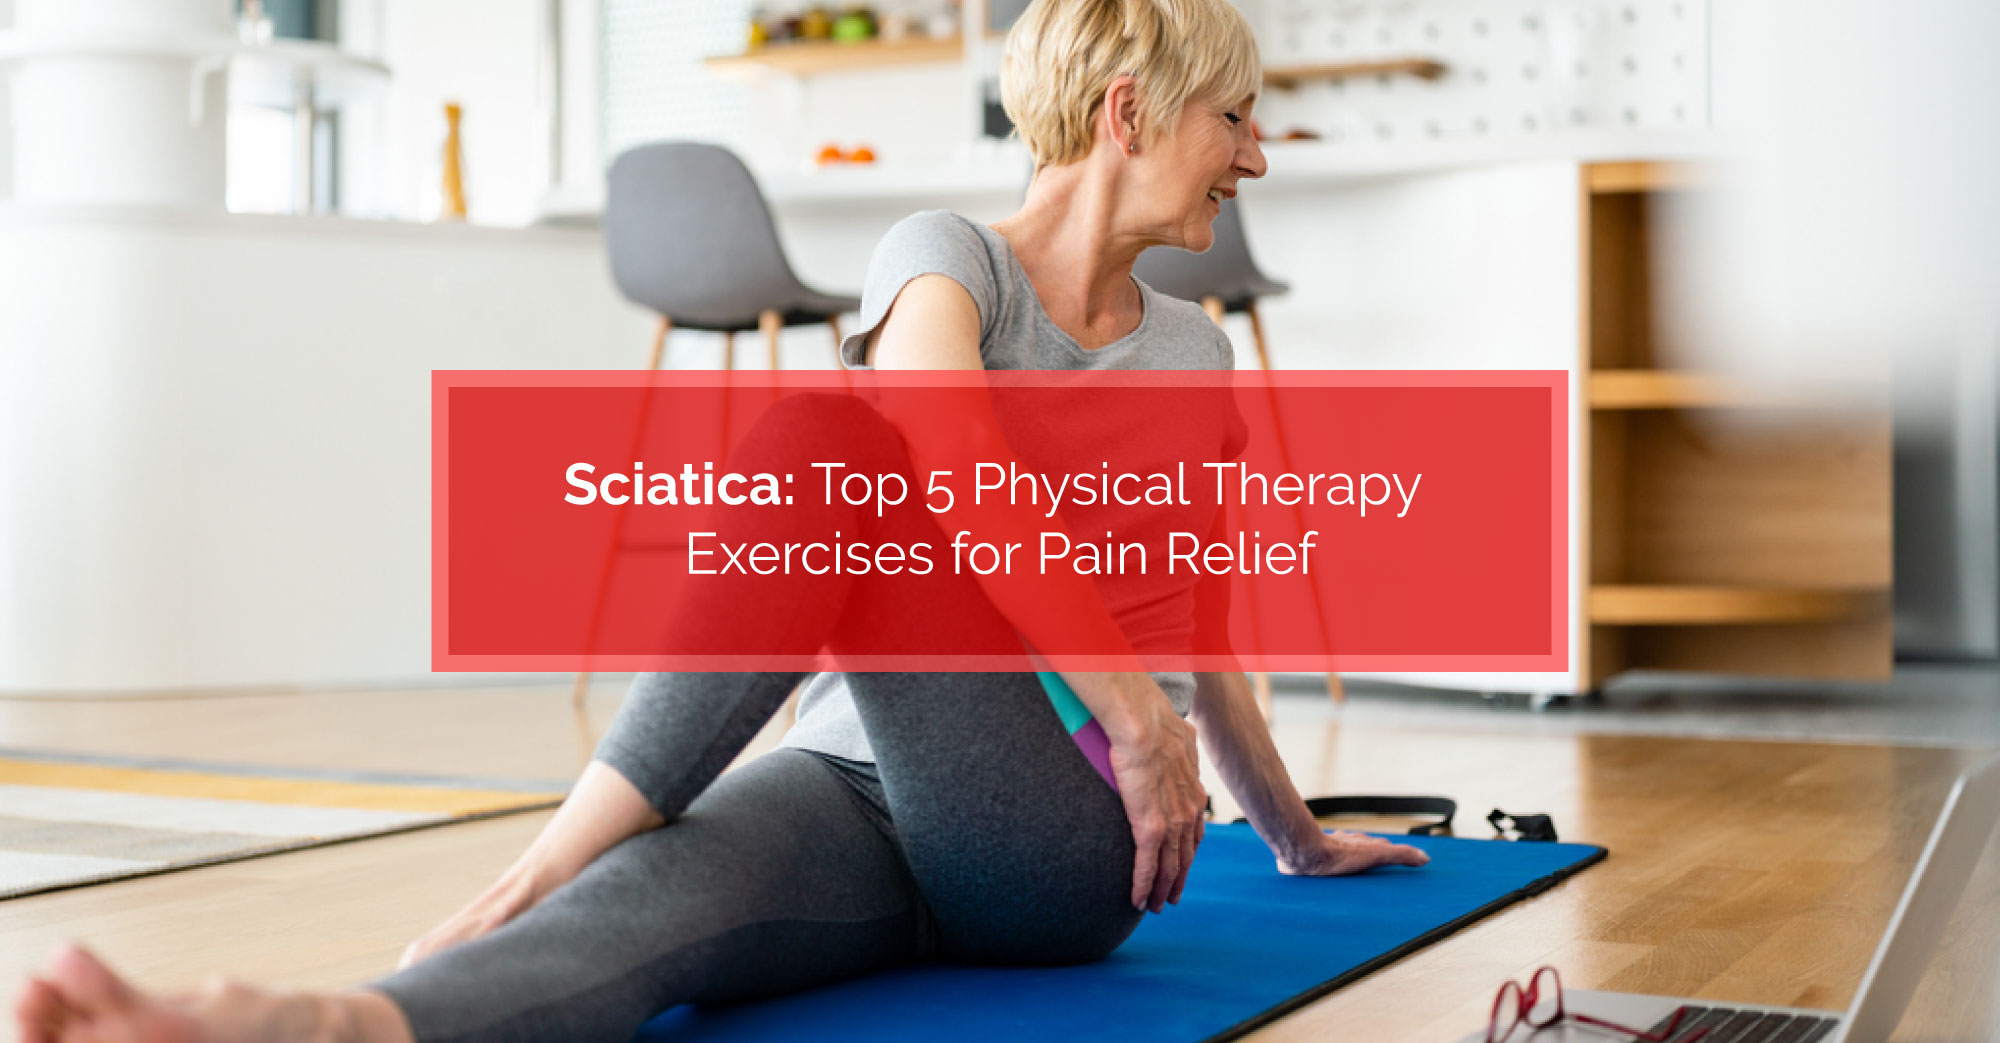 What are the best and worst exercises for sciatica?